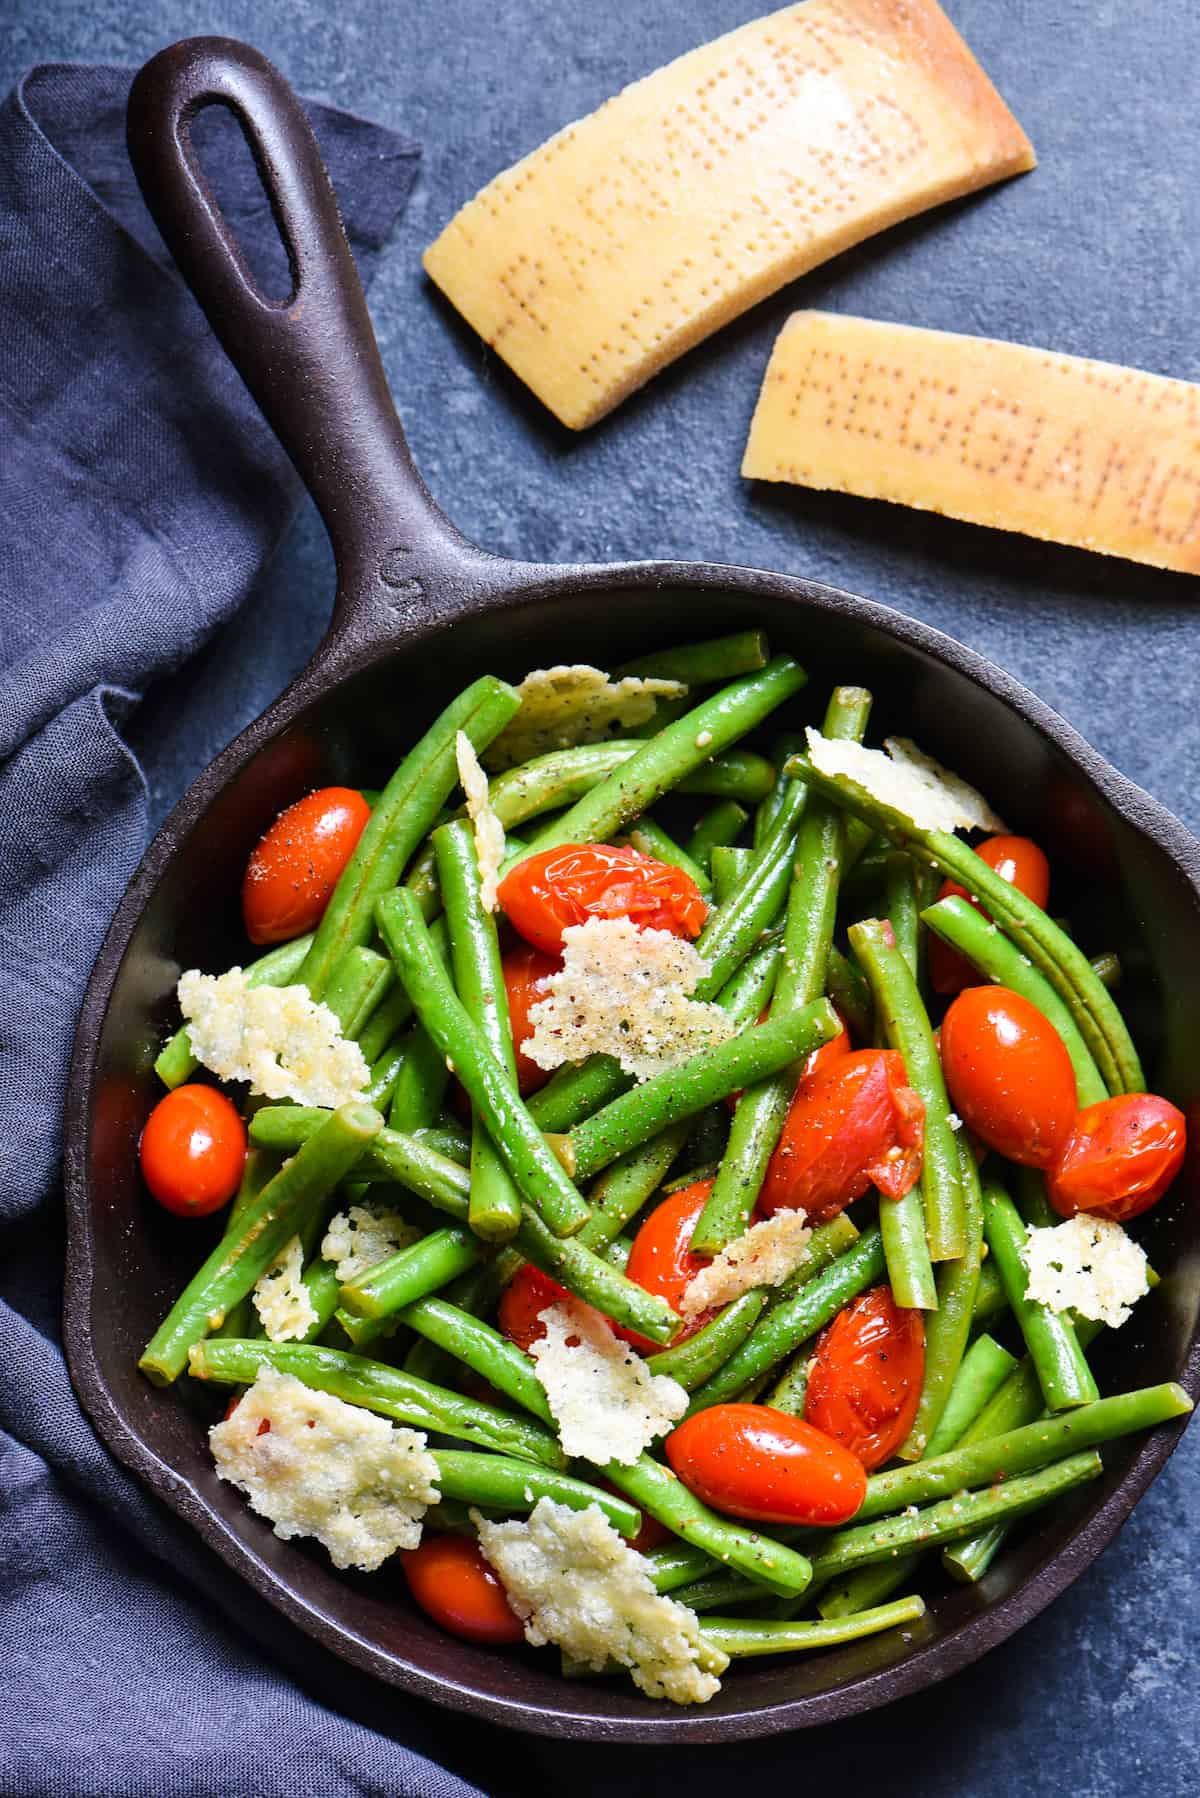 Sautéed Green Beans with Tomatoes & Crispy Parmesan - A simple but fancy-looking side dish for any special meal. | foxeslovelemons.com